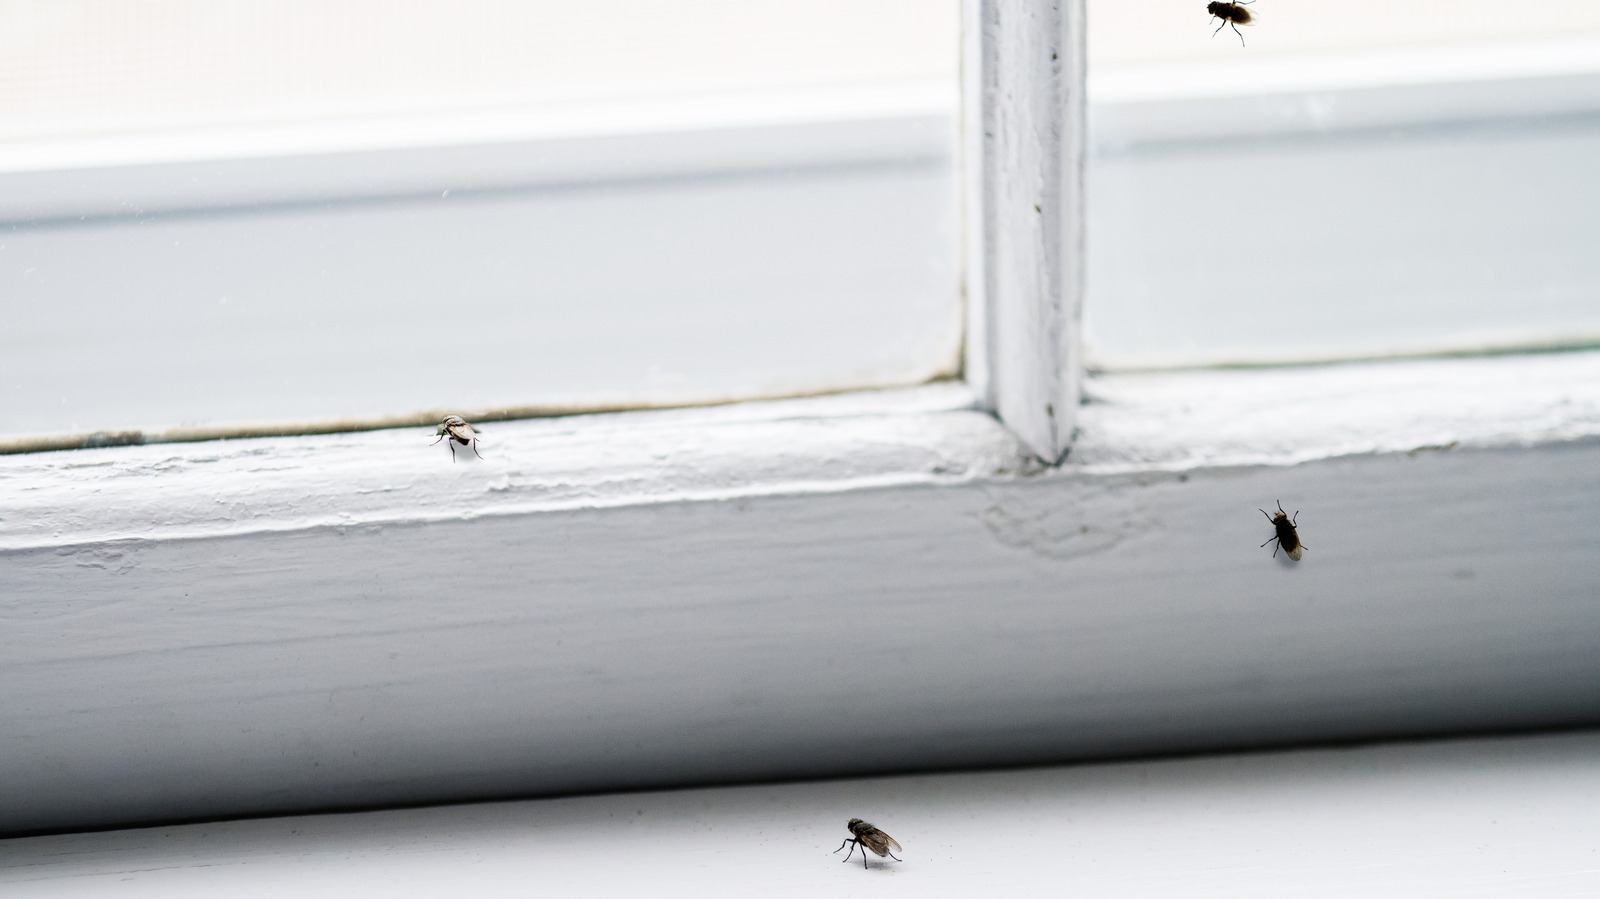 How To Make Your Own Fly Paper for Indoor Pests